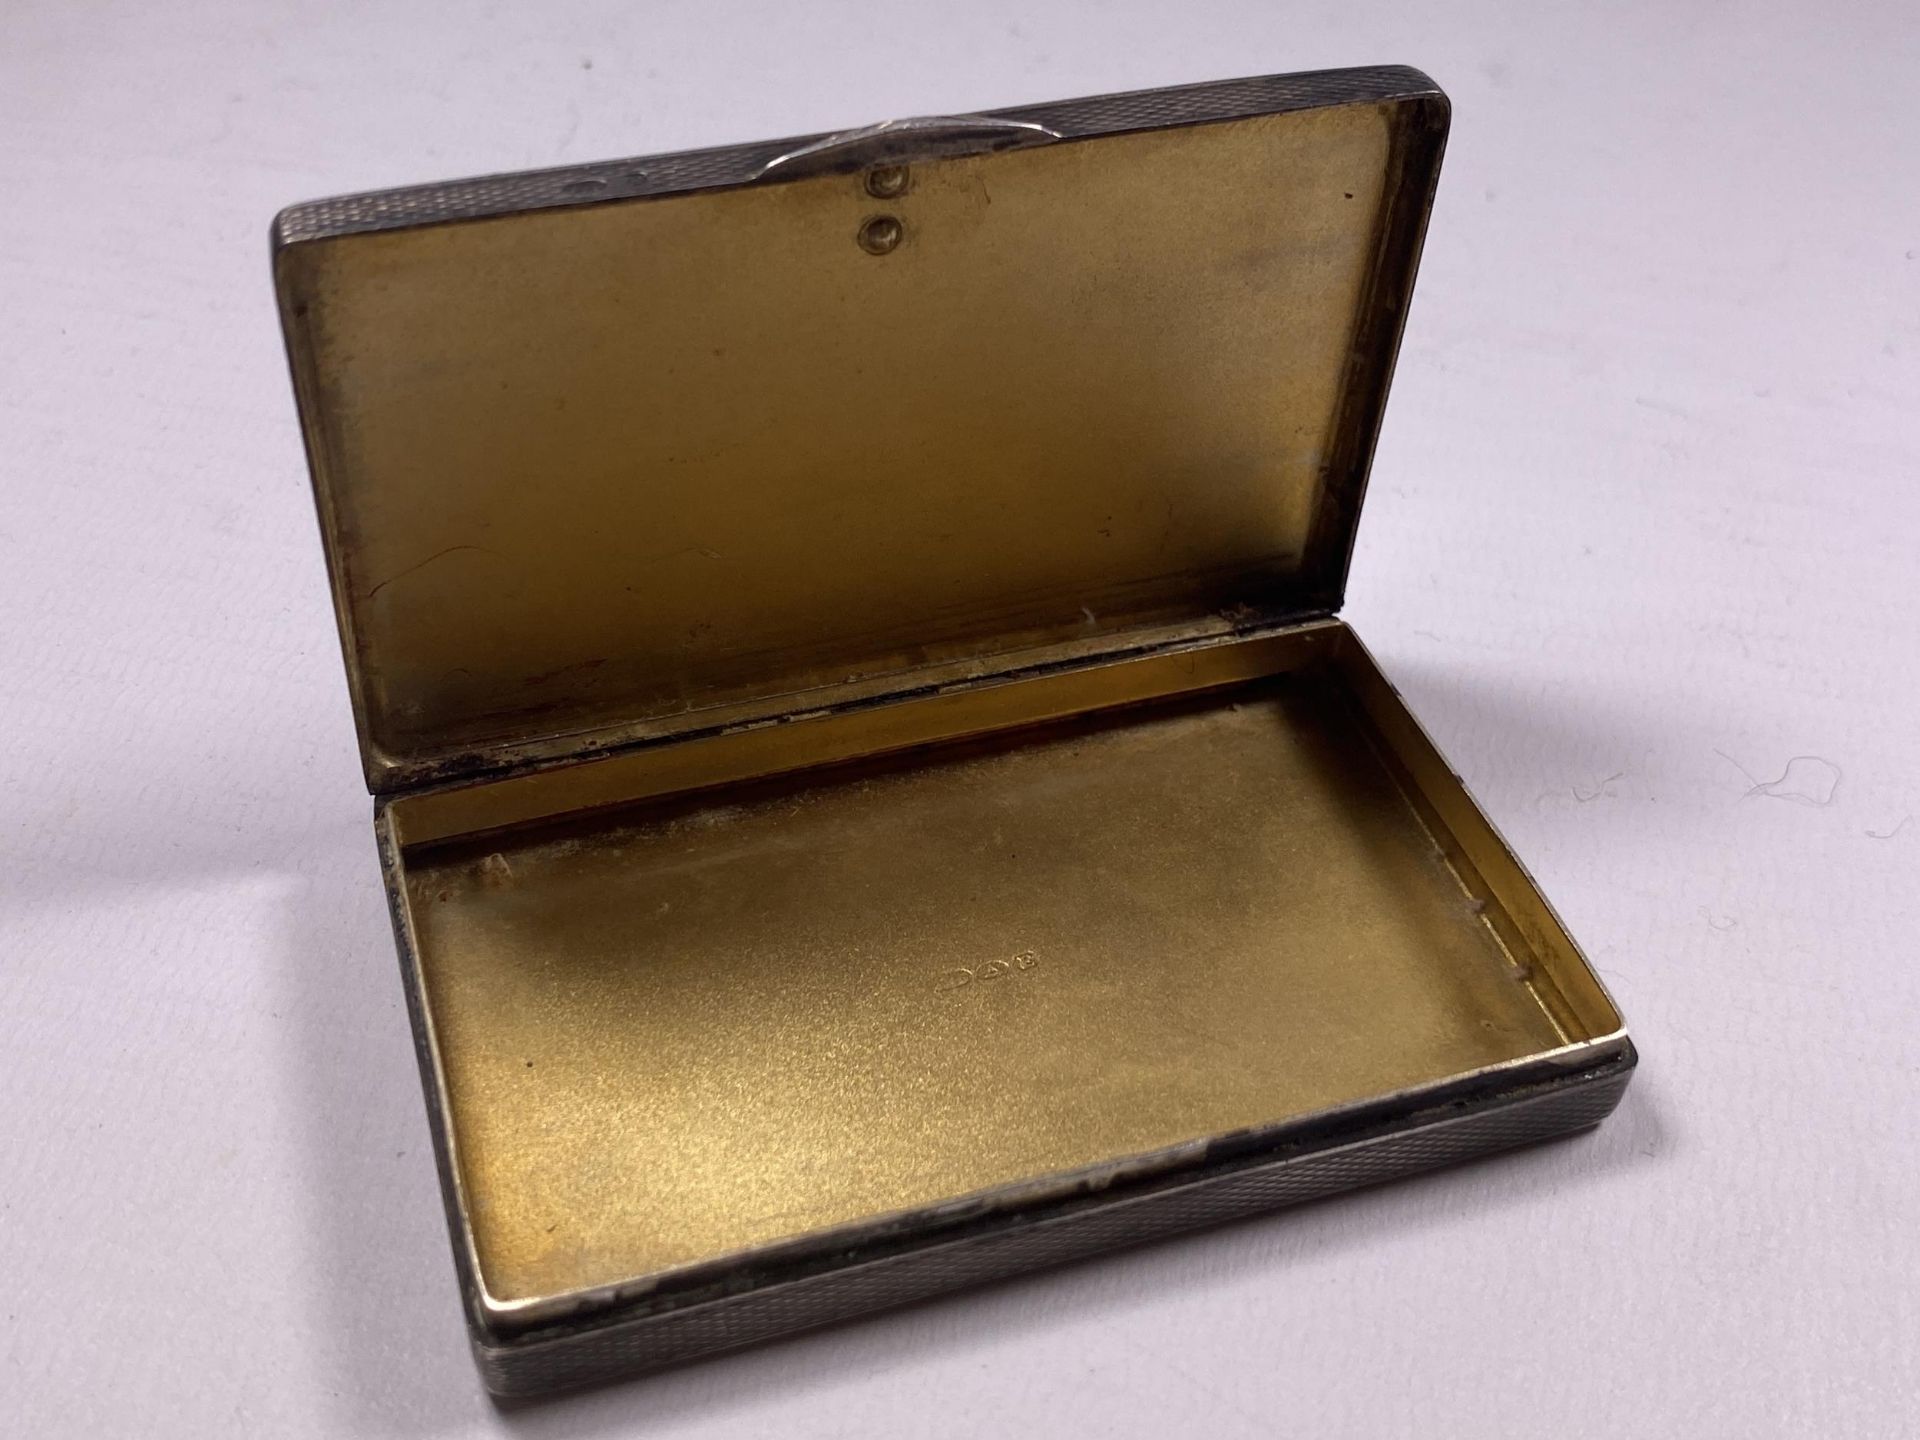 AN ART DECO .925 HALLMARKED SILVER CARD CASE, IMPORT HALLMARKS TO INTERIOR, LENGTH 8CM - Image 4 of 5